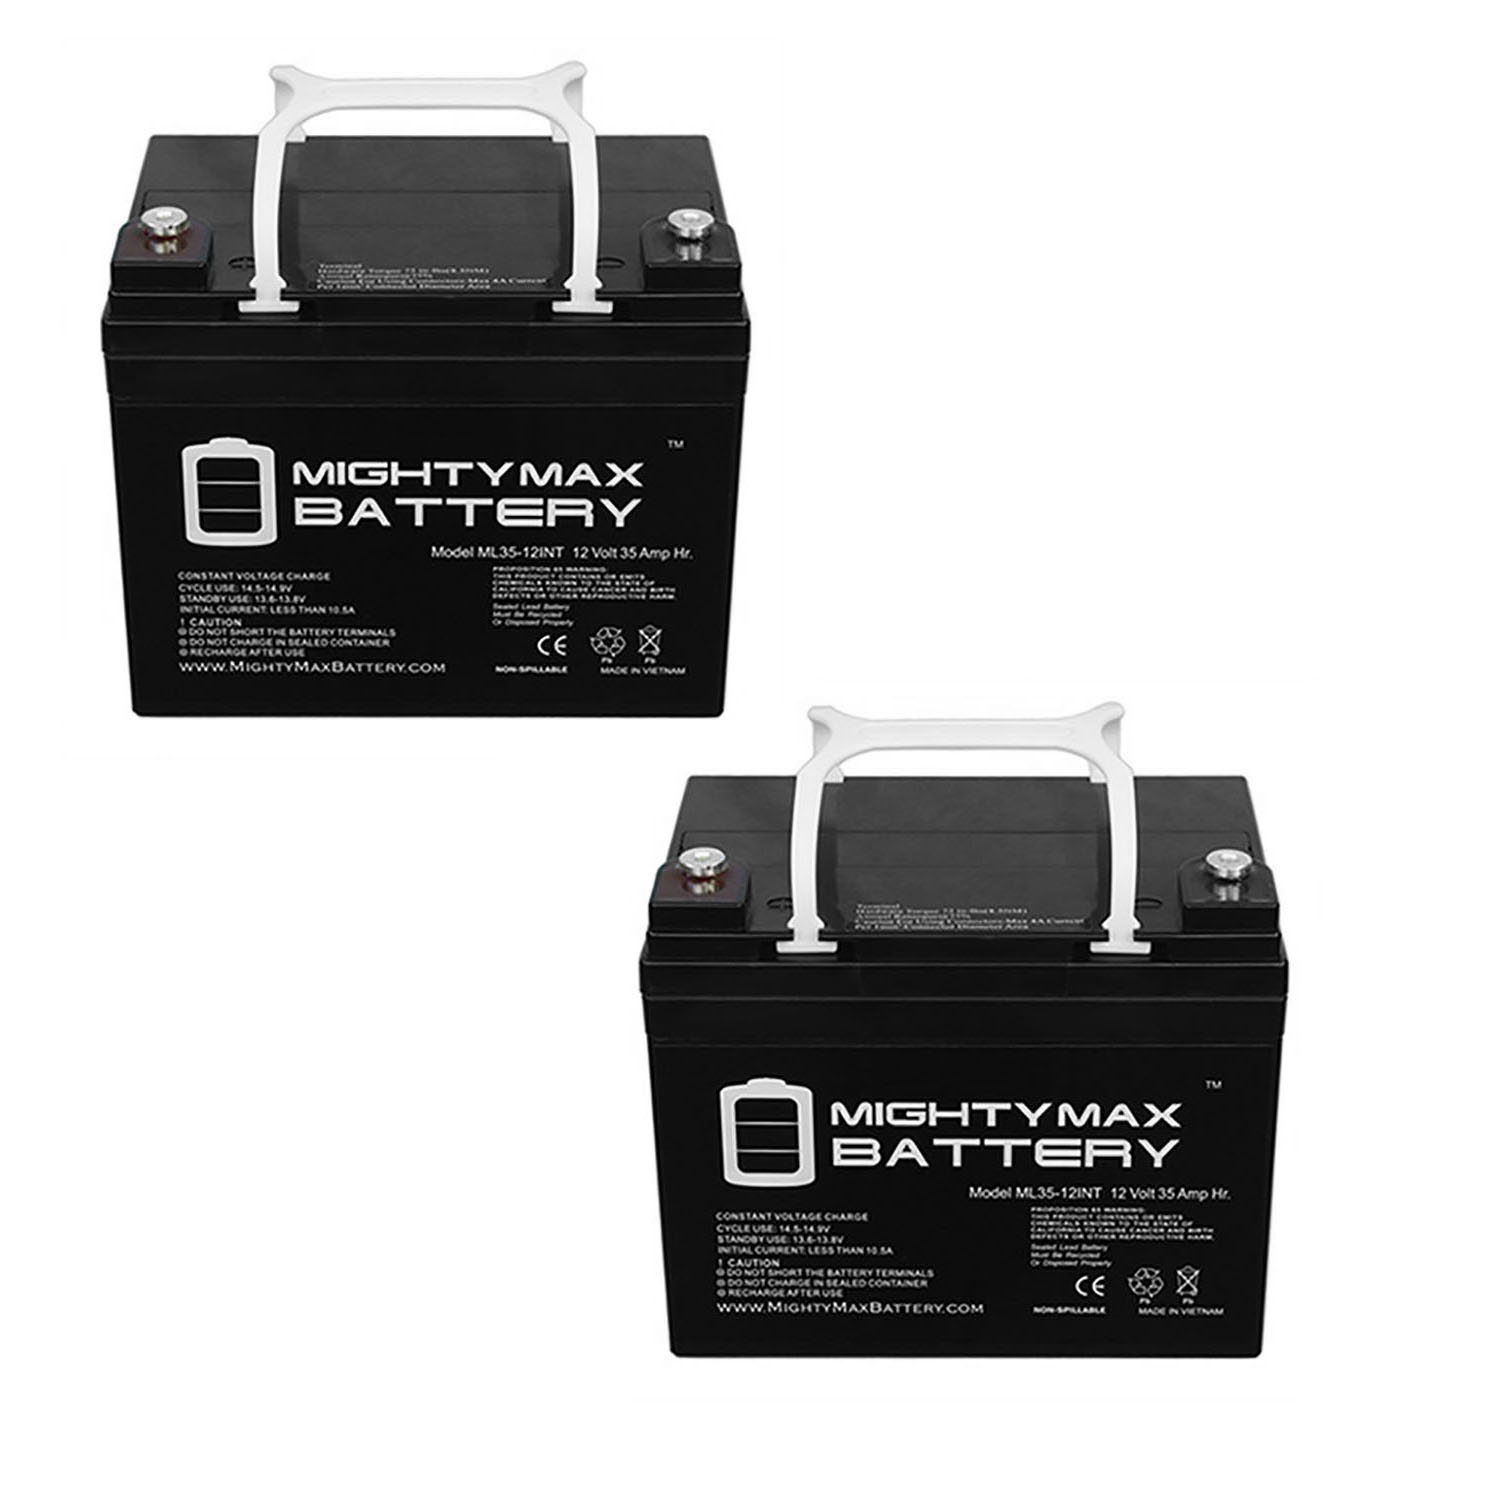 12V 35AH INT Replacement Battery for Best Battery SLA12350 - 2 Pack